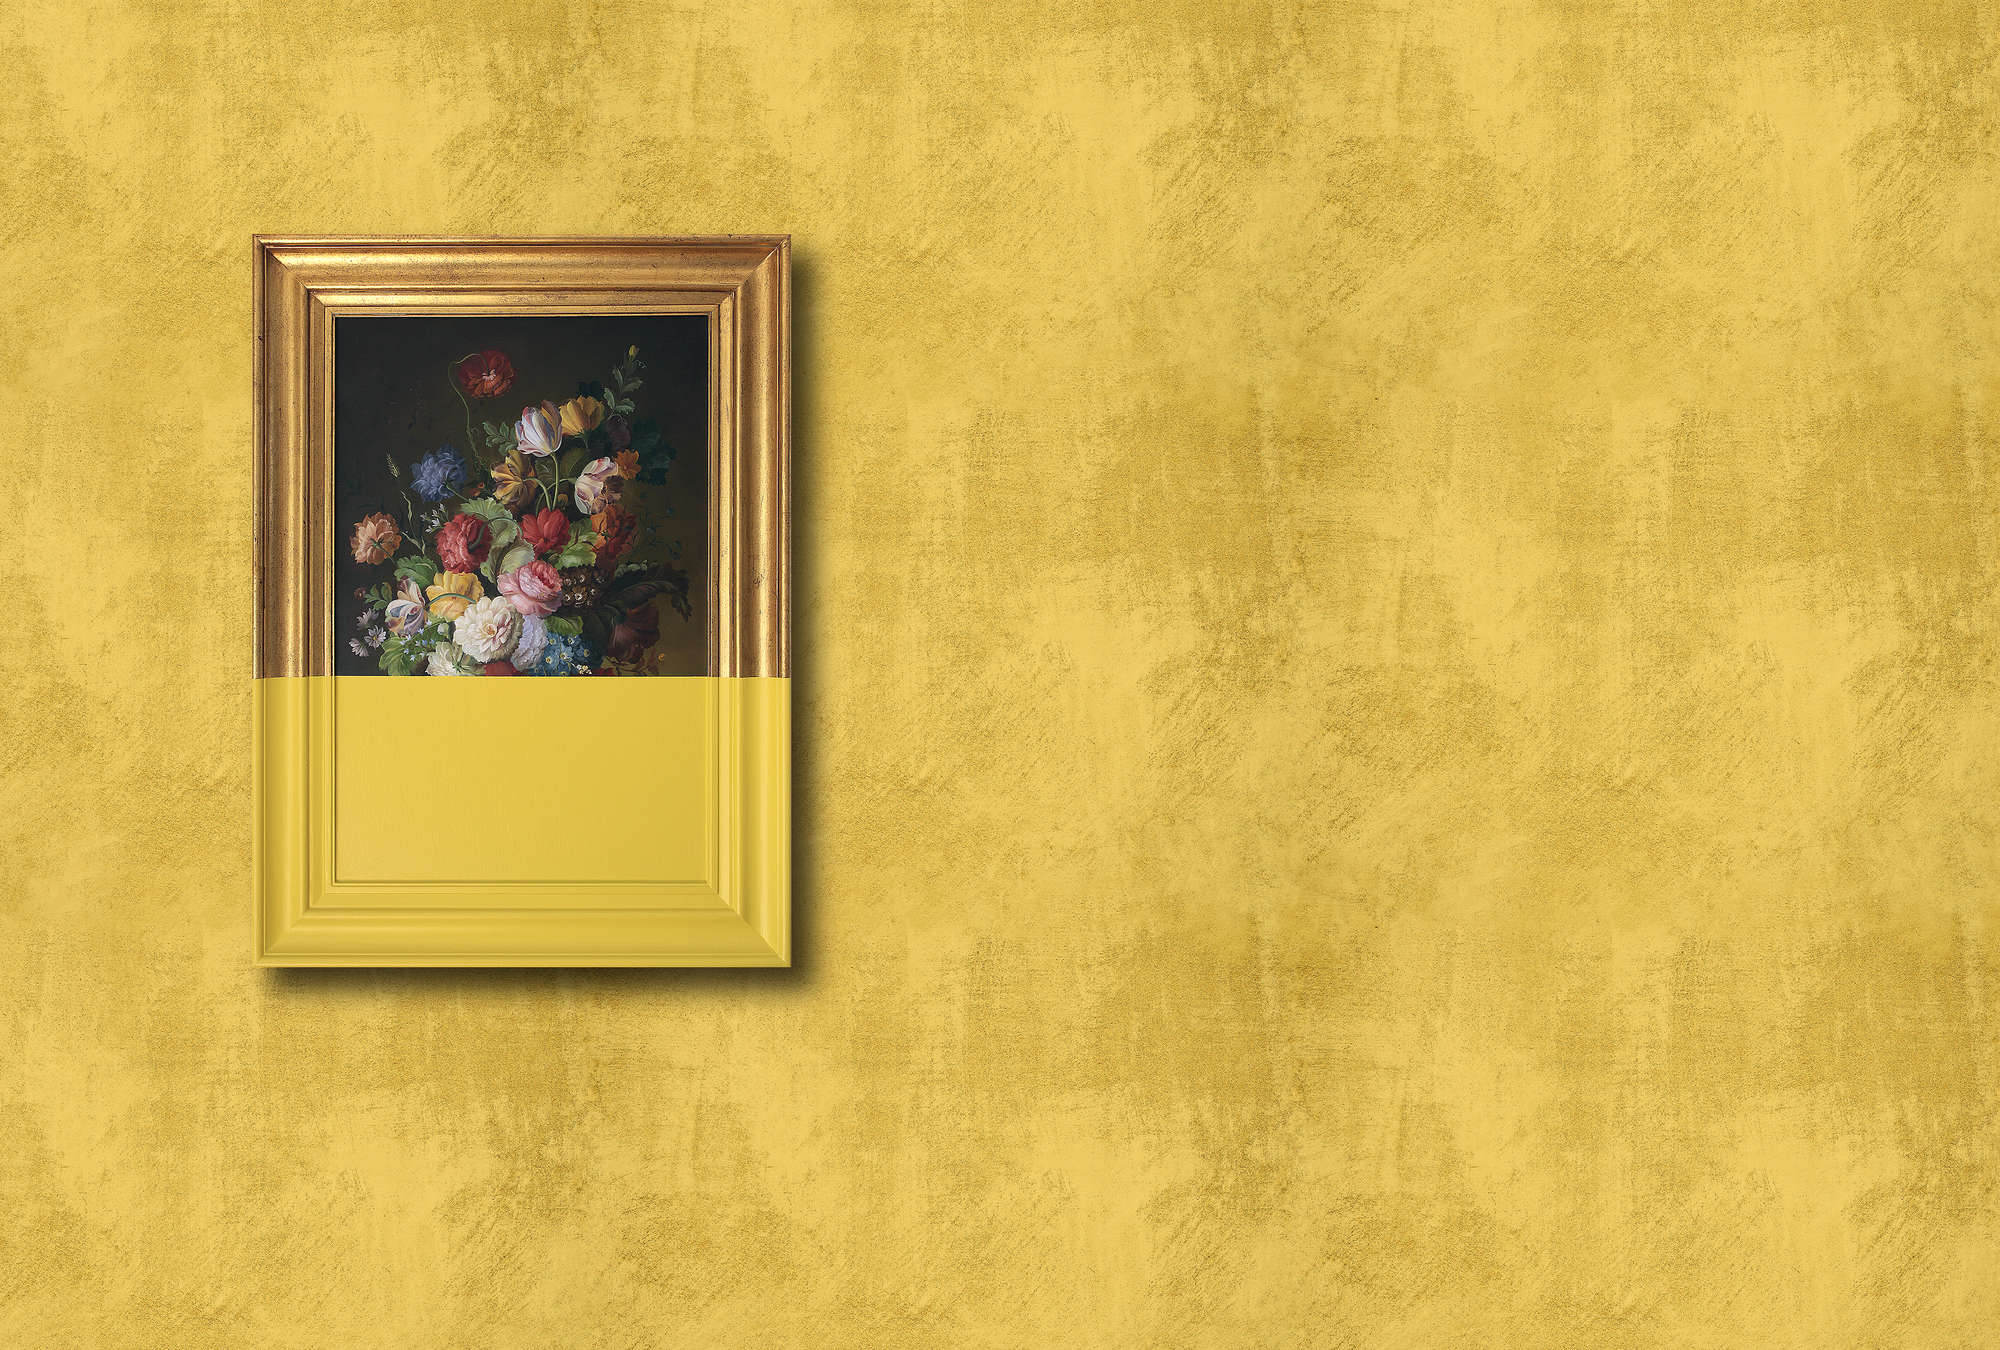             Frame 1 - Photo wallpaper art modern interpreted in wiped plaster structure - yellow, copper | structure non-woven
        